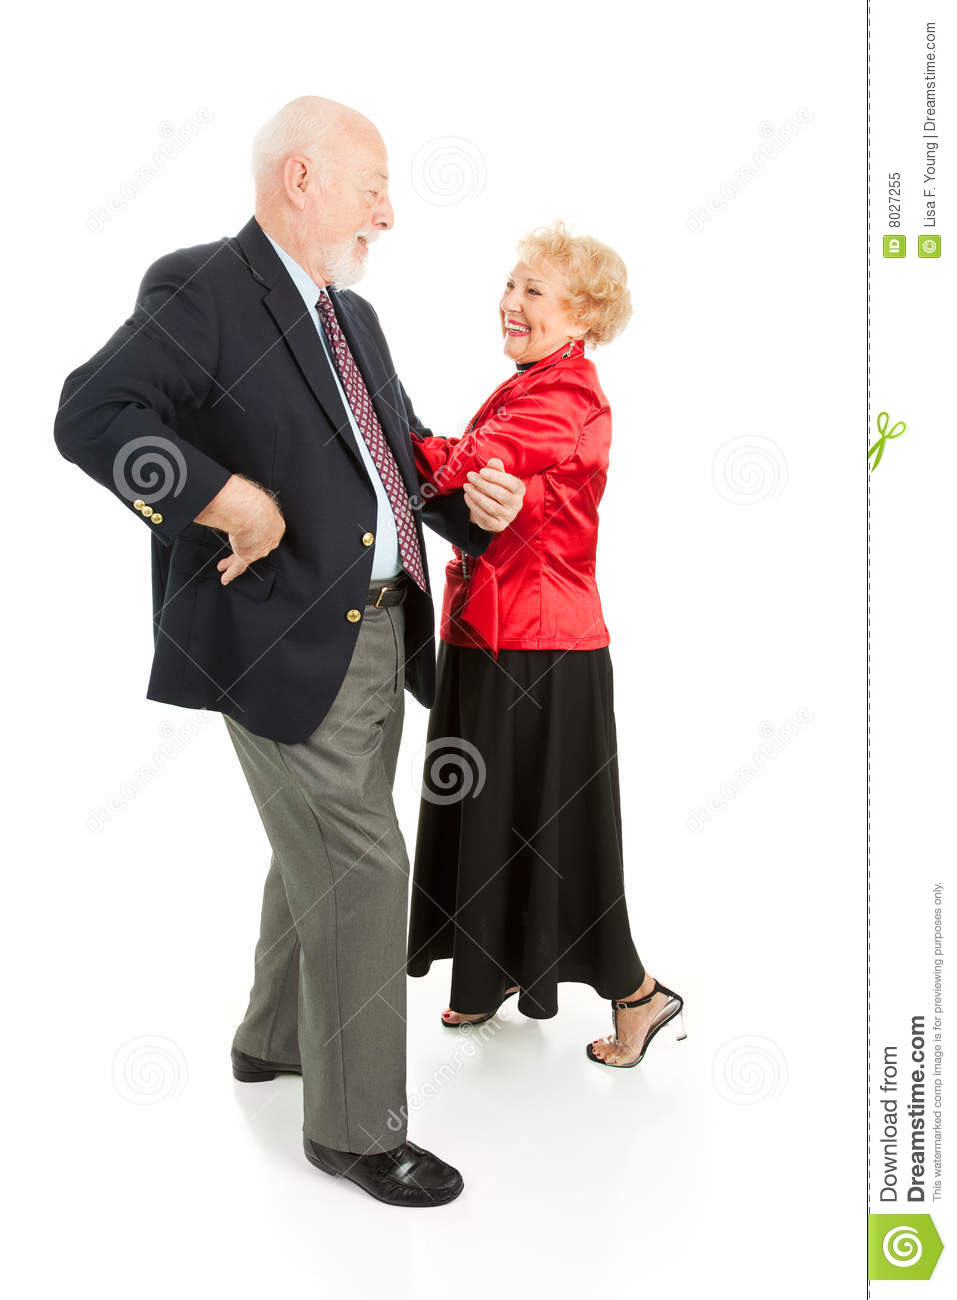 Senior Couple Having A Great Time Square Dancing  Isolated On White